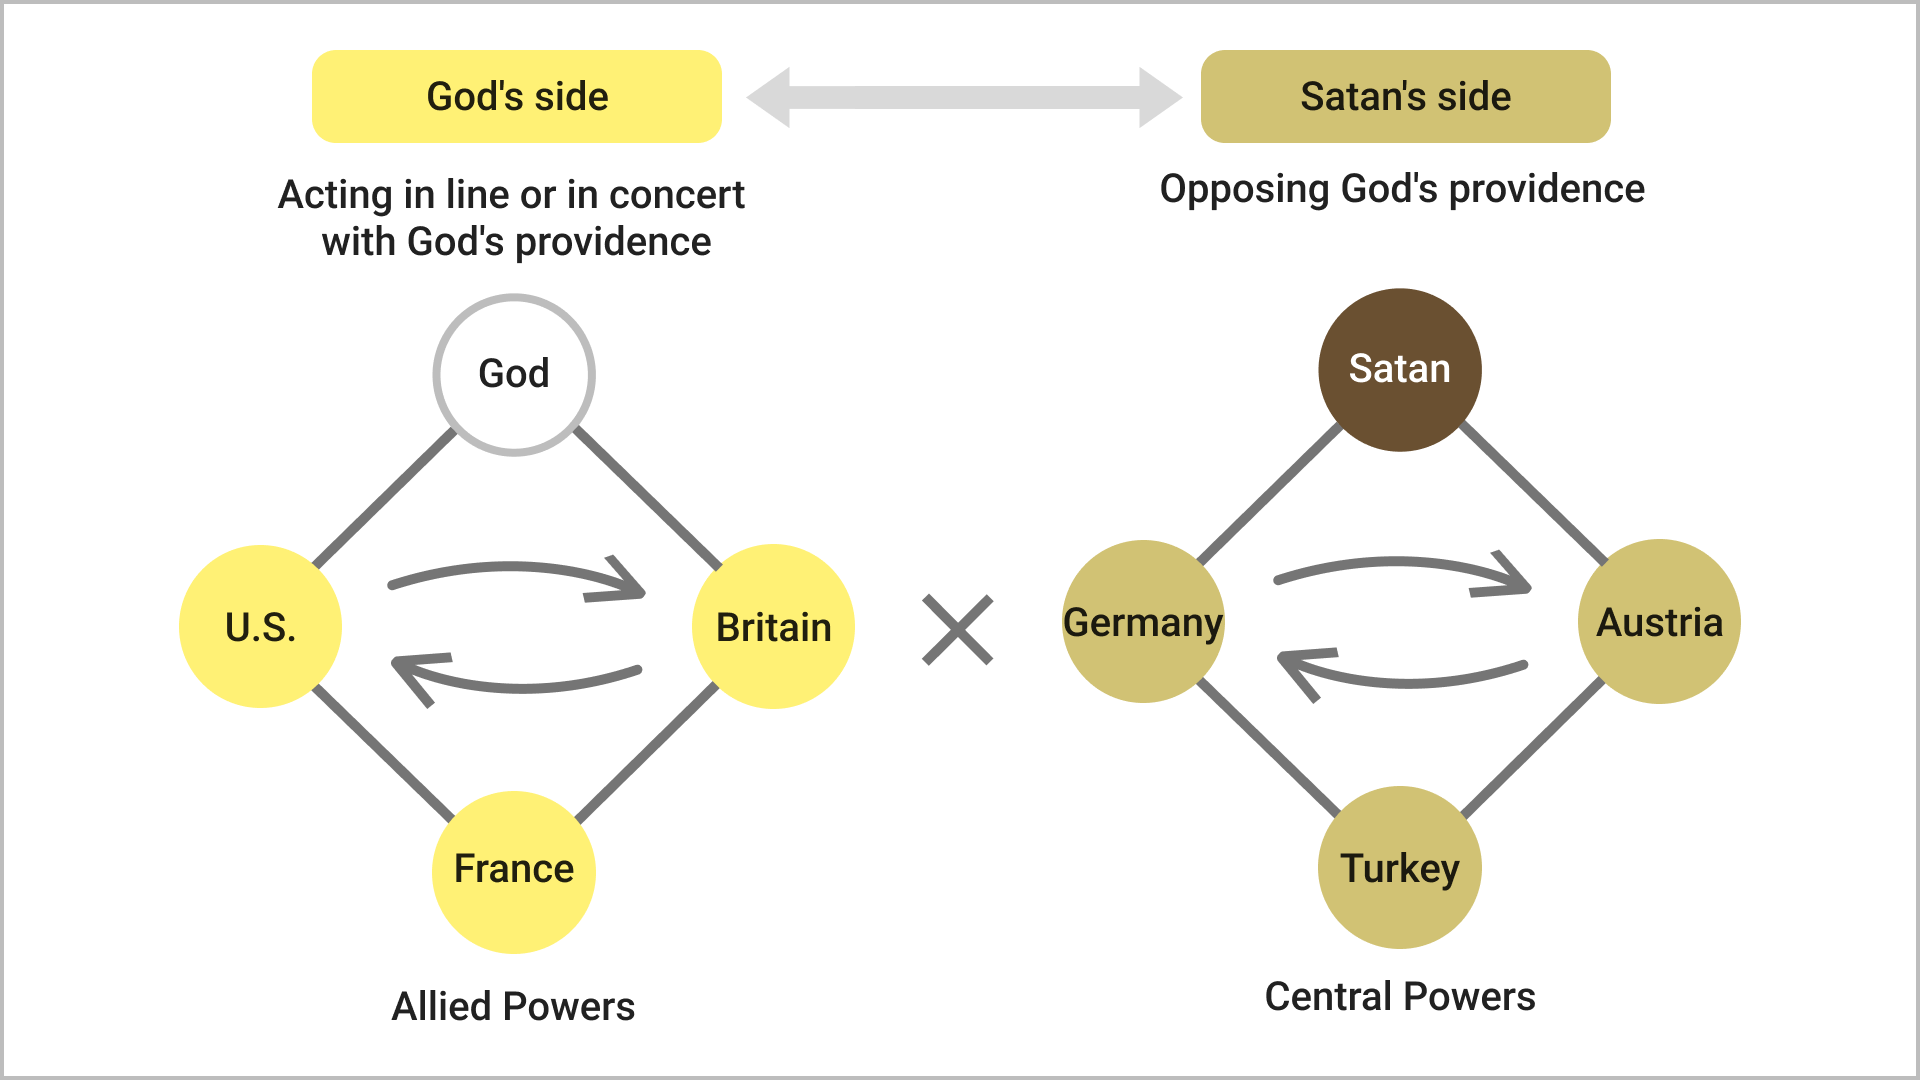 What Decides God's Side and Satan's Side?